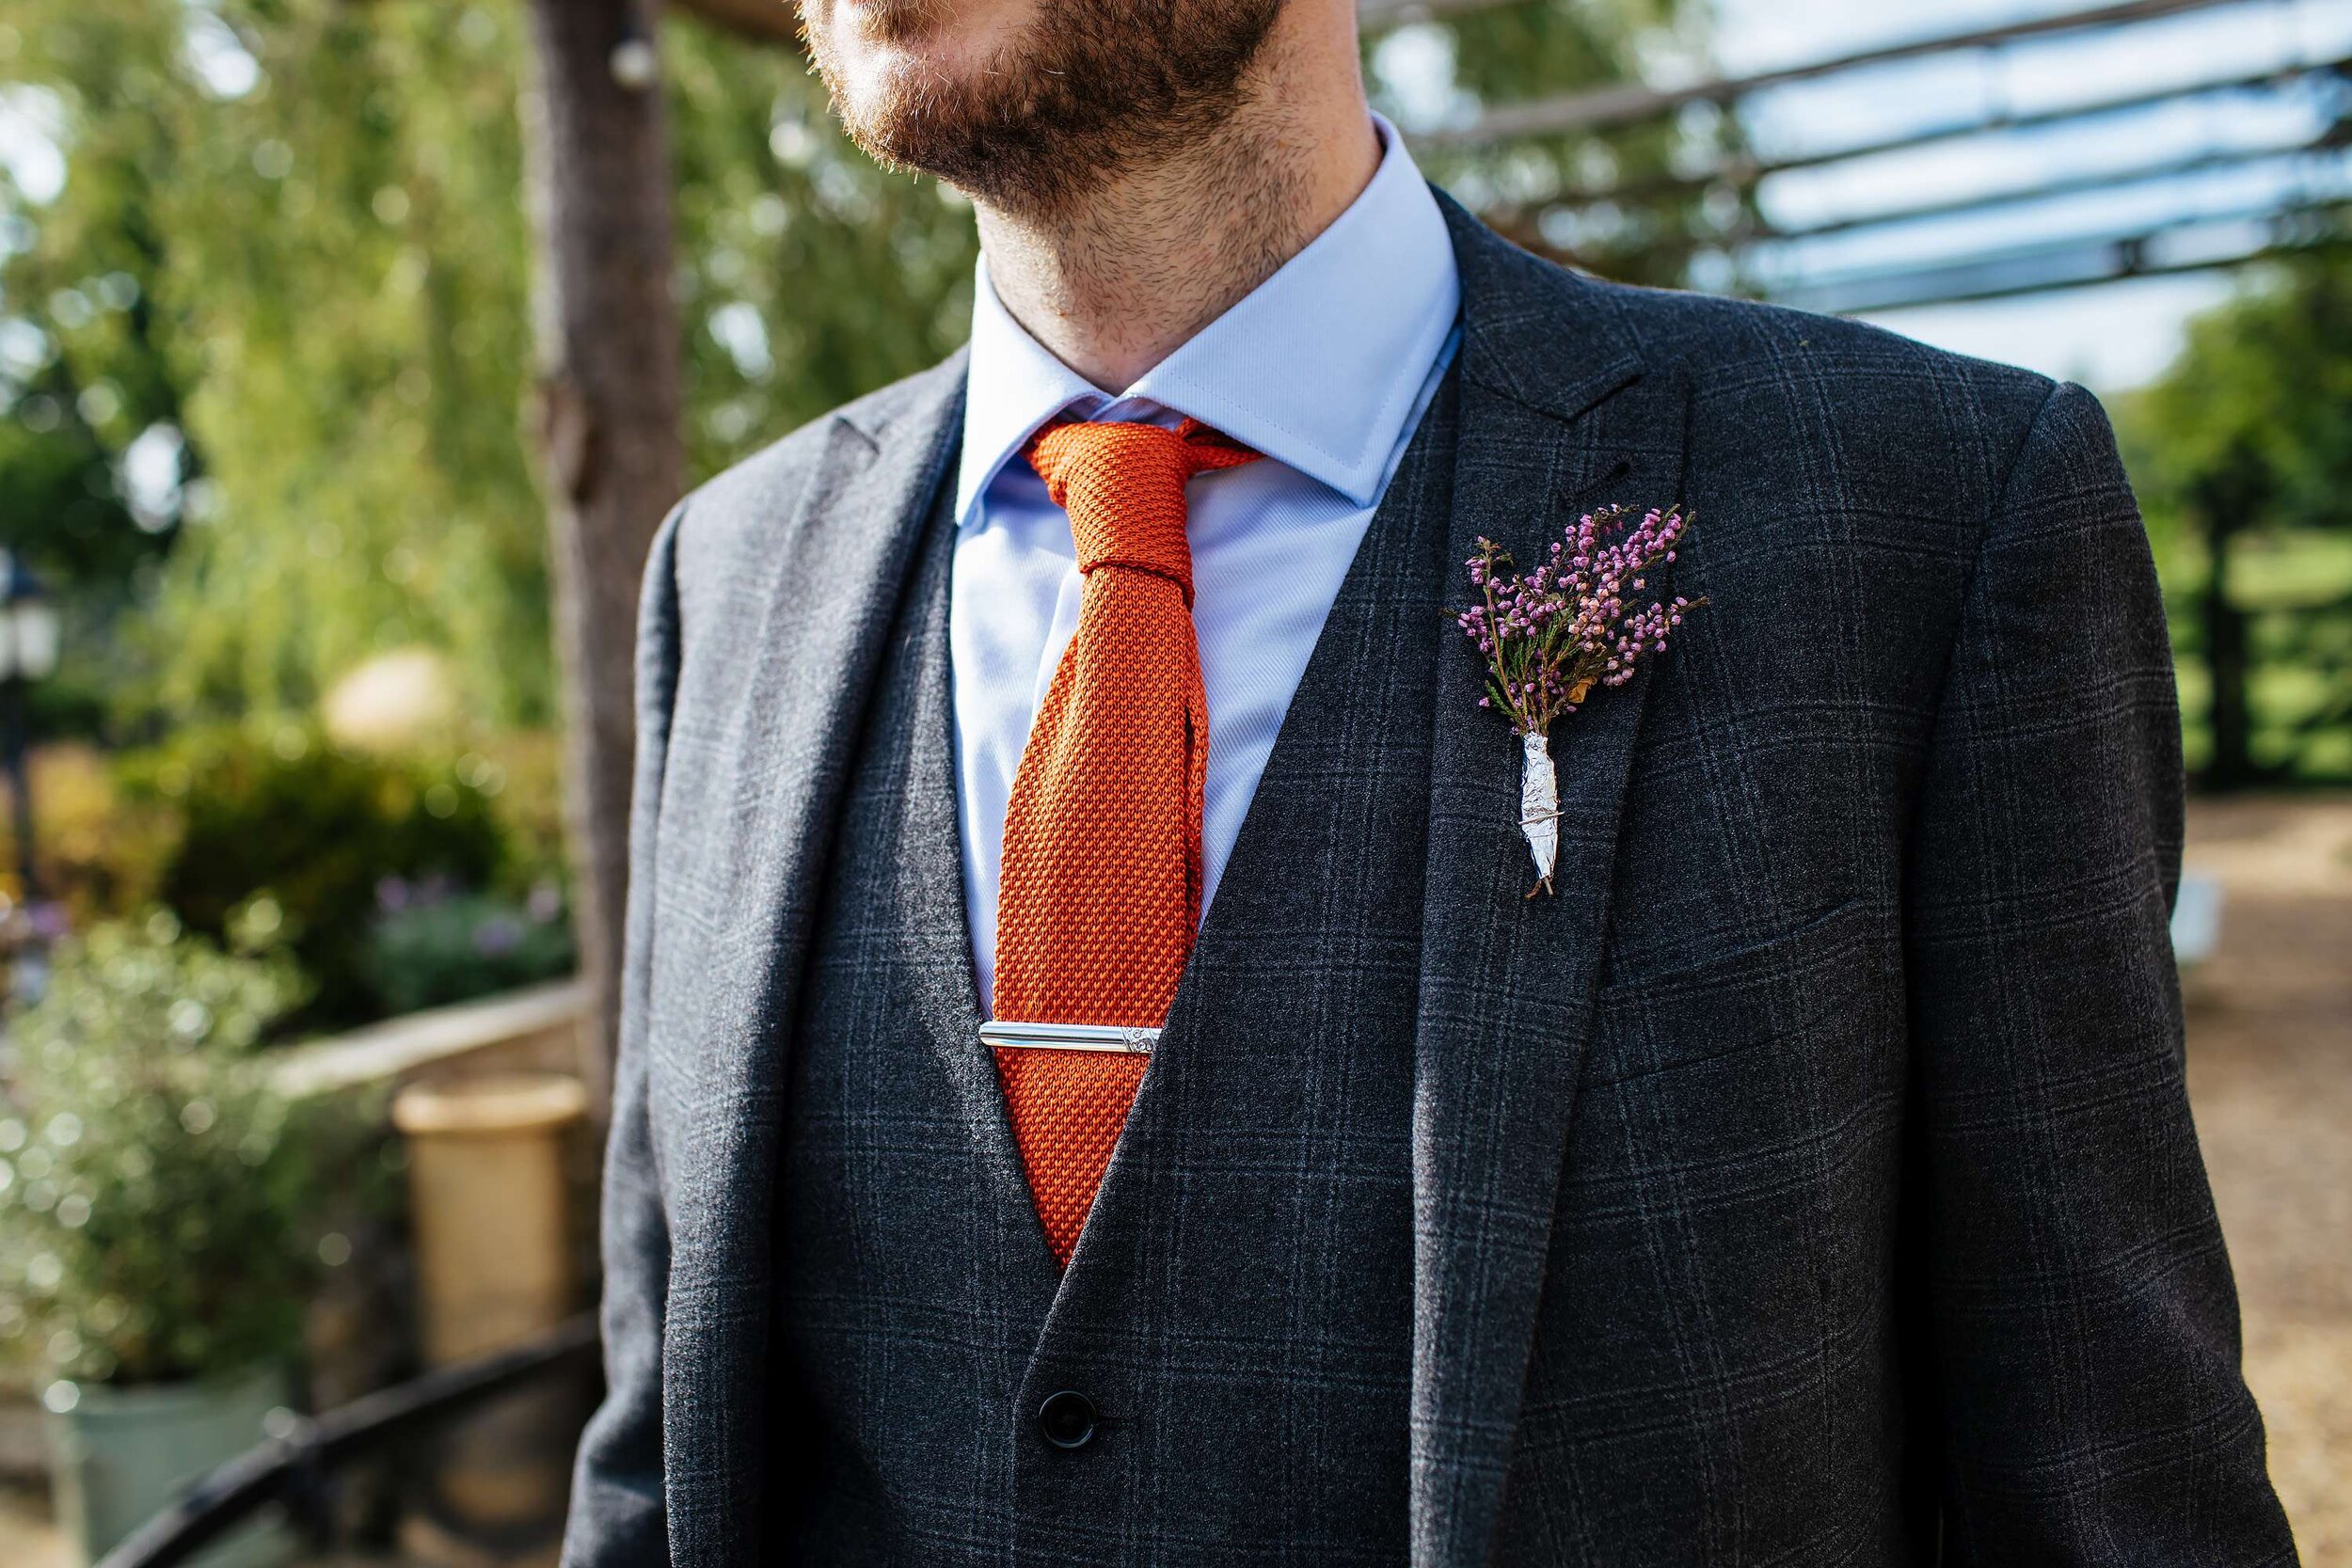 Detail of the grooms suit at his wedding